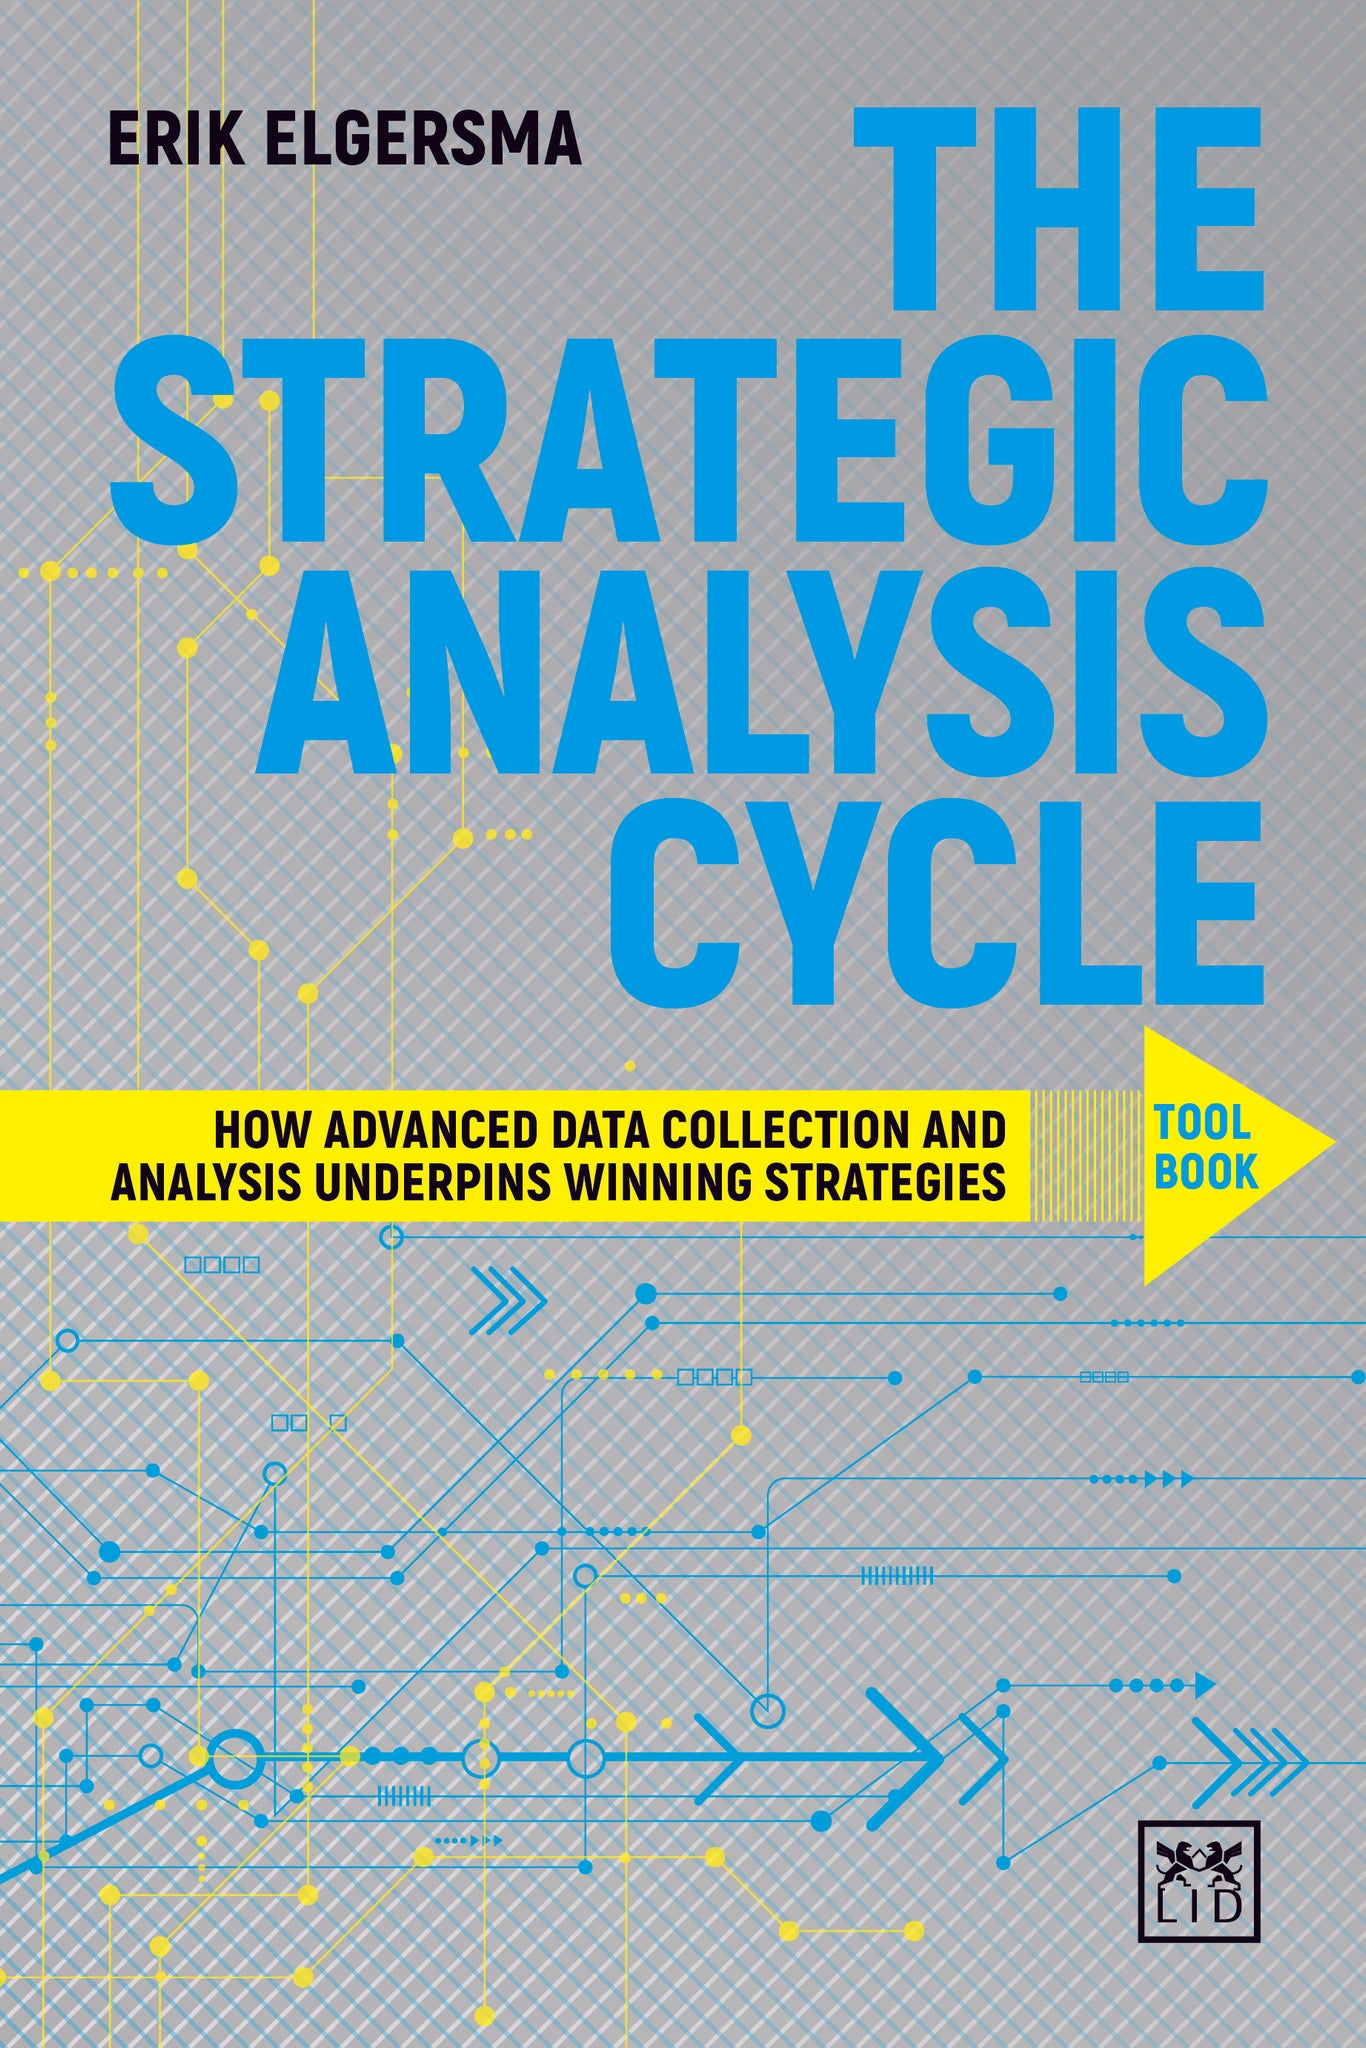 The Strategic Analysis Cycle Tool Book: How Advanced Data Collection and Analysis Underpins Winning Strategies